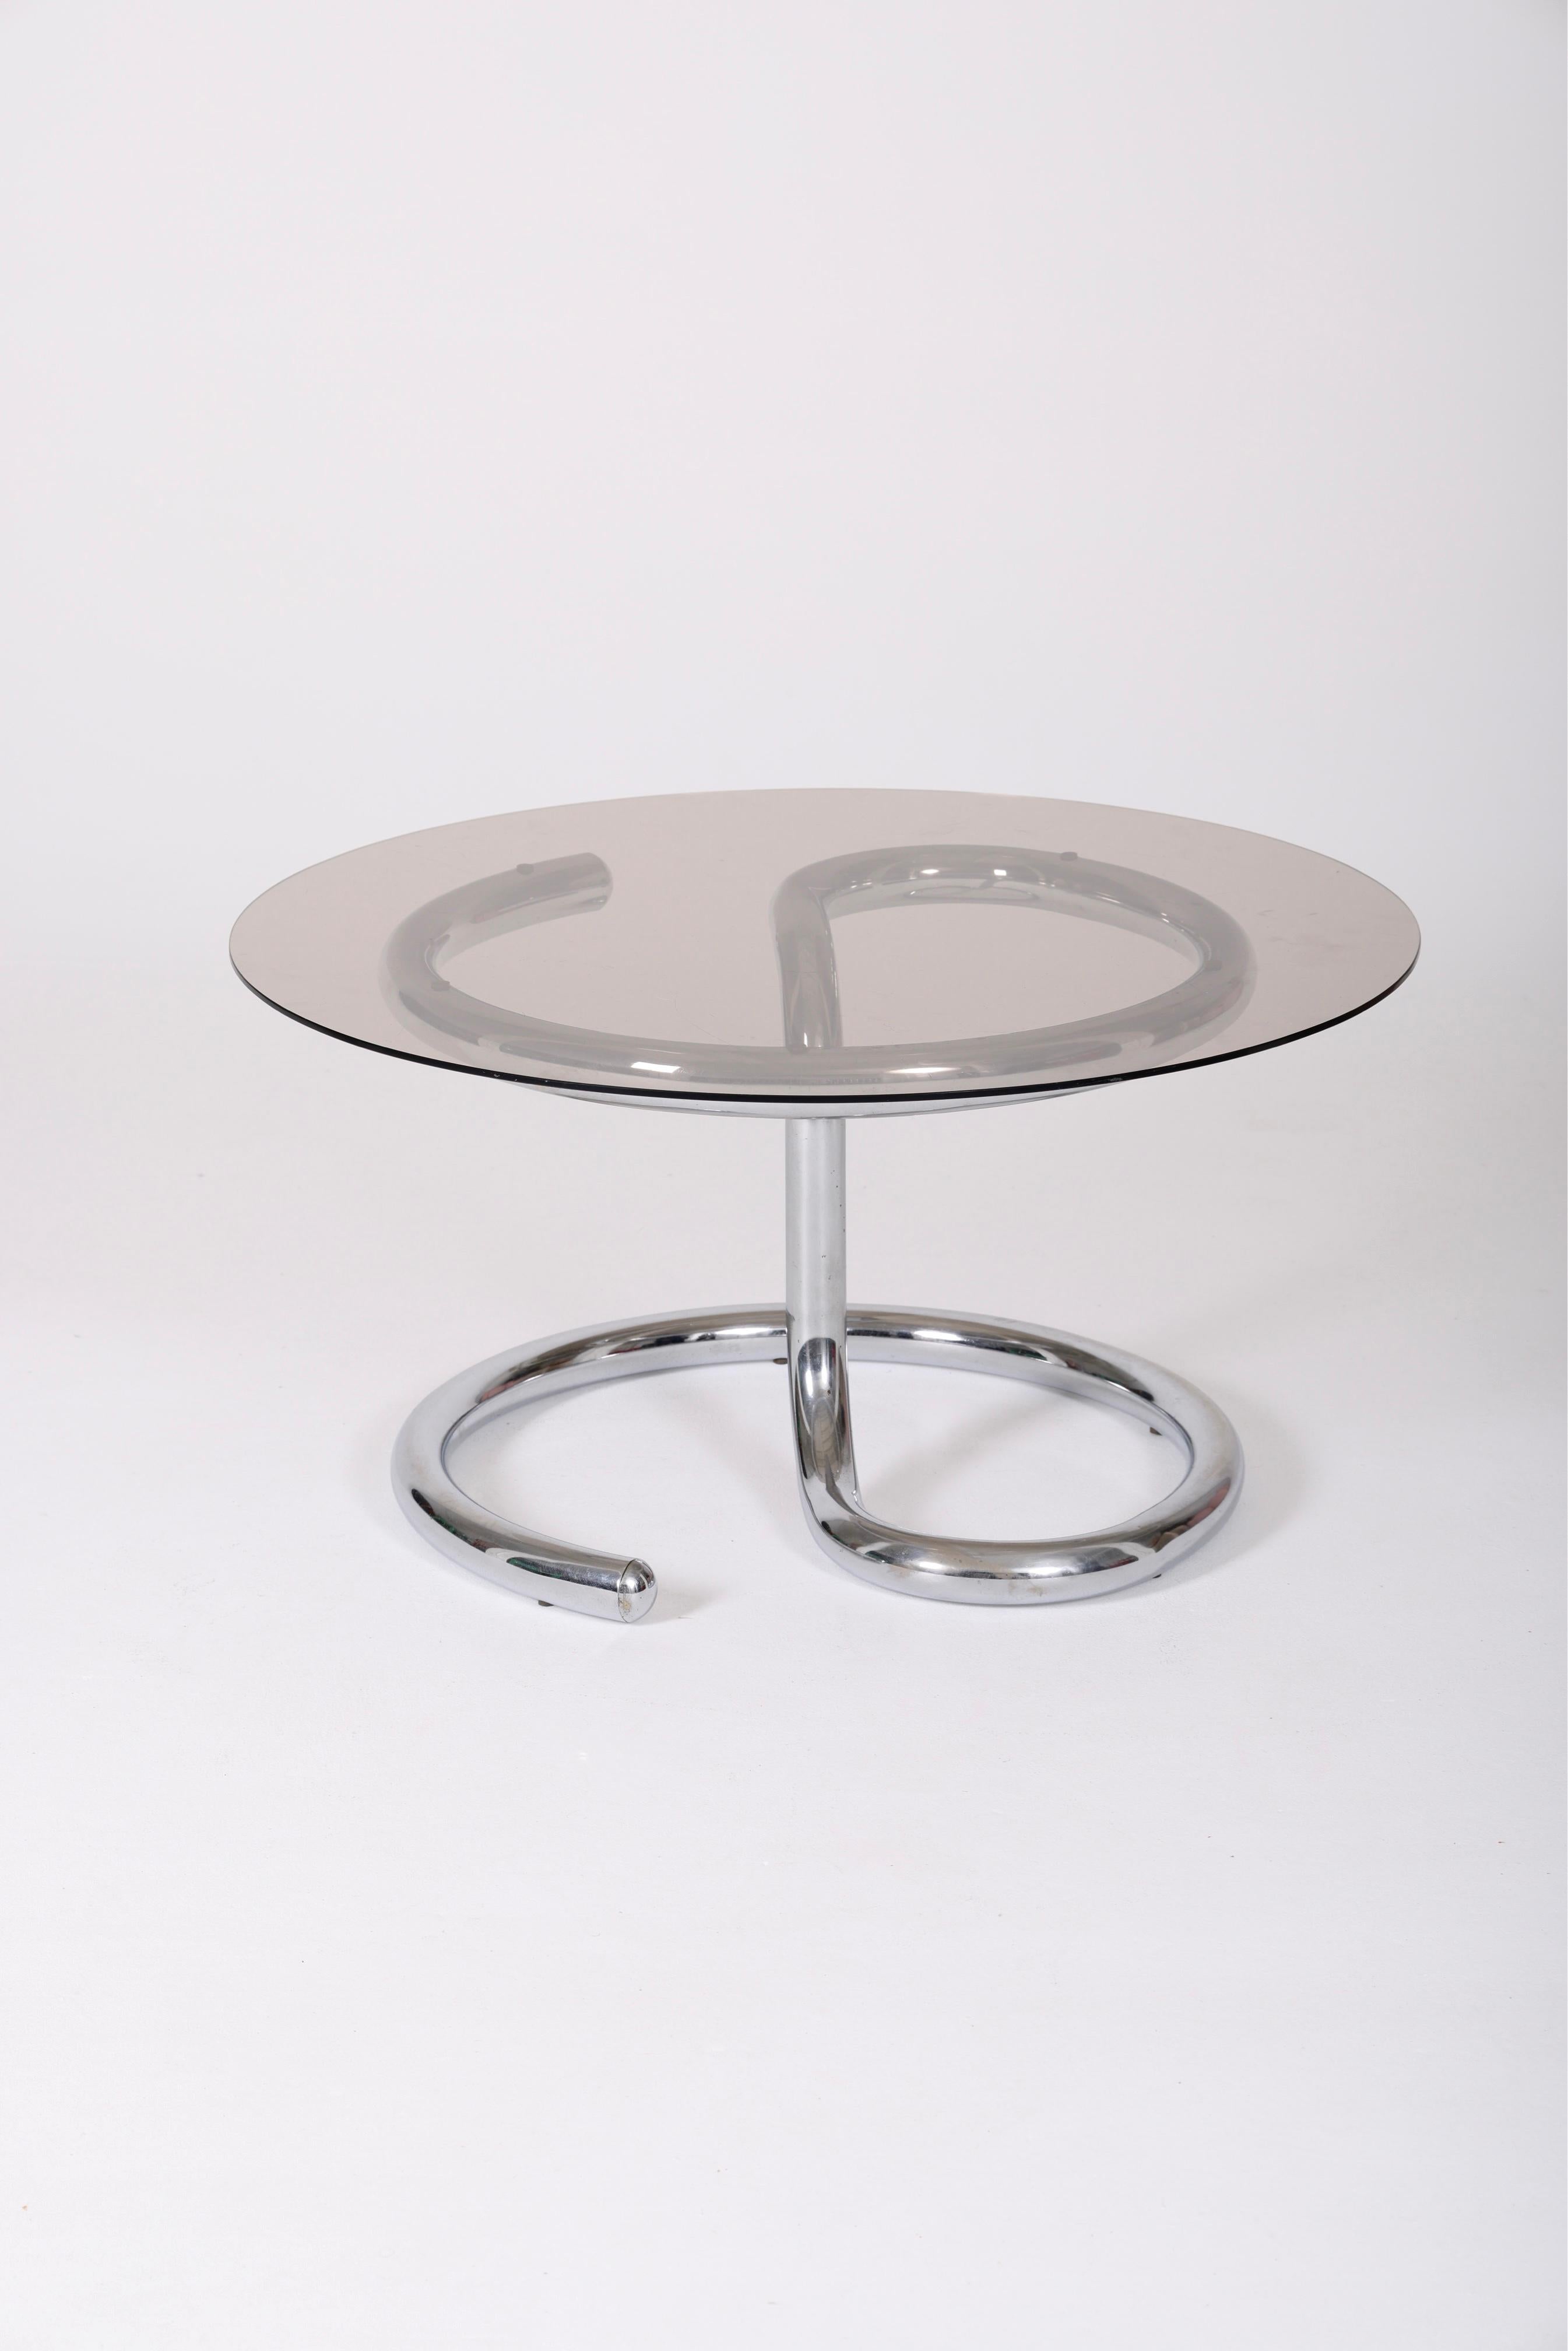 20th Century Anaconda Coffee Table by Paul Tuttle, 1970s